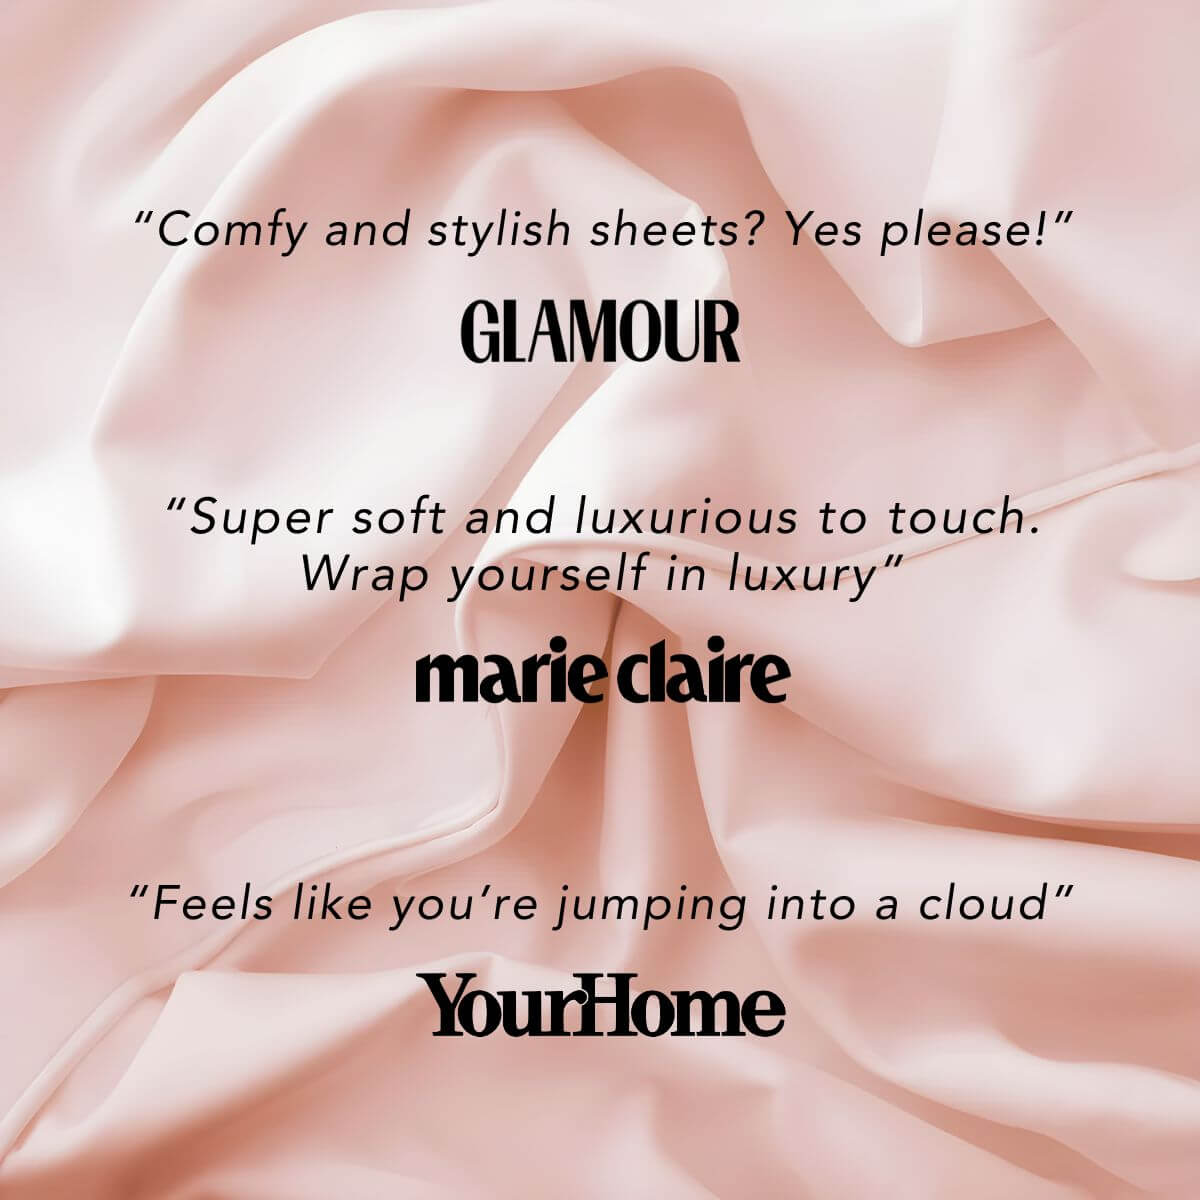 "Comfy and stylish sheets? Yes please!" GLAMOUR